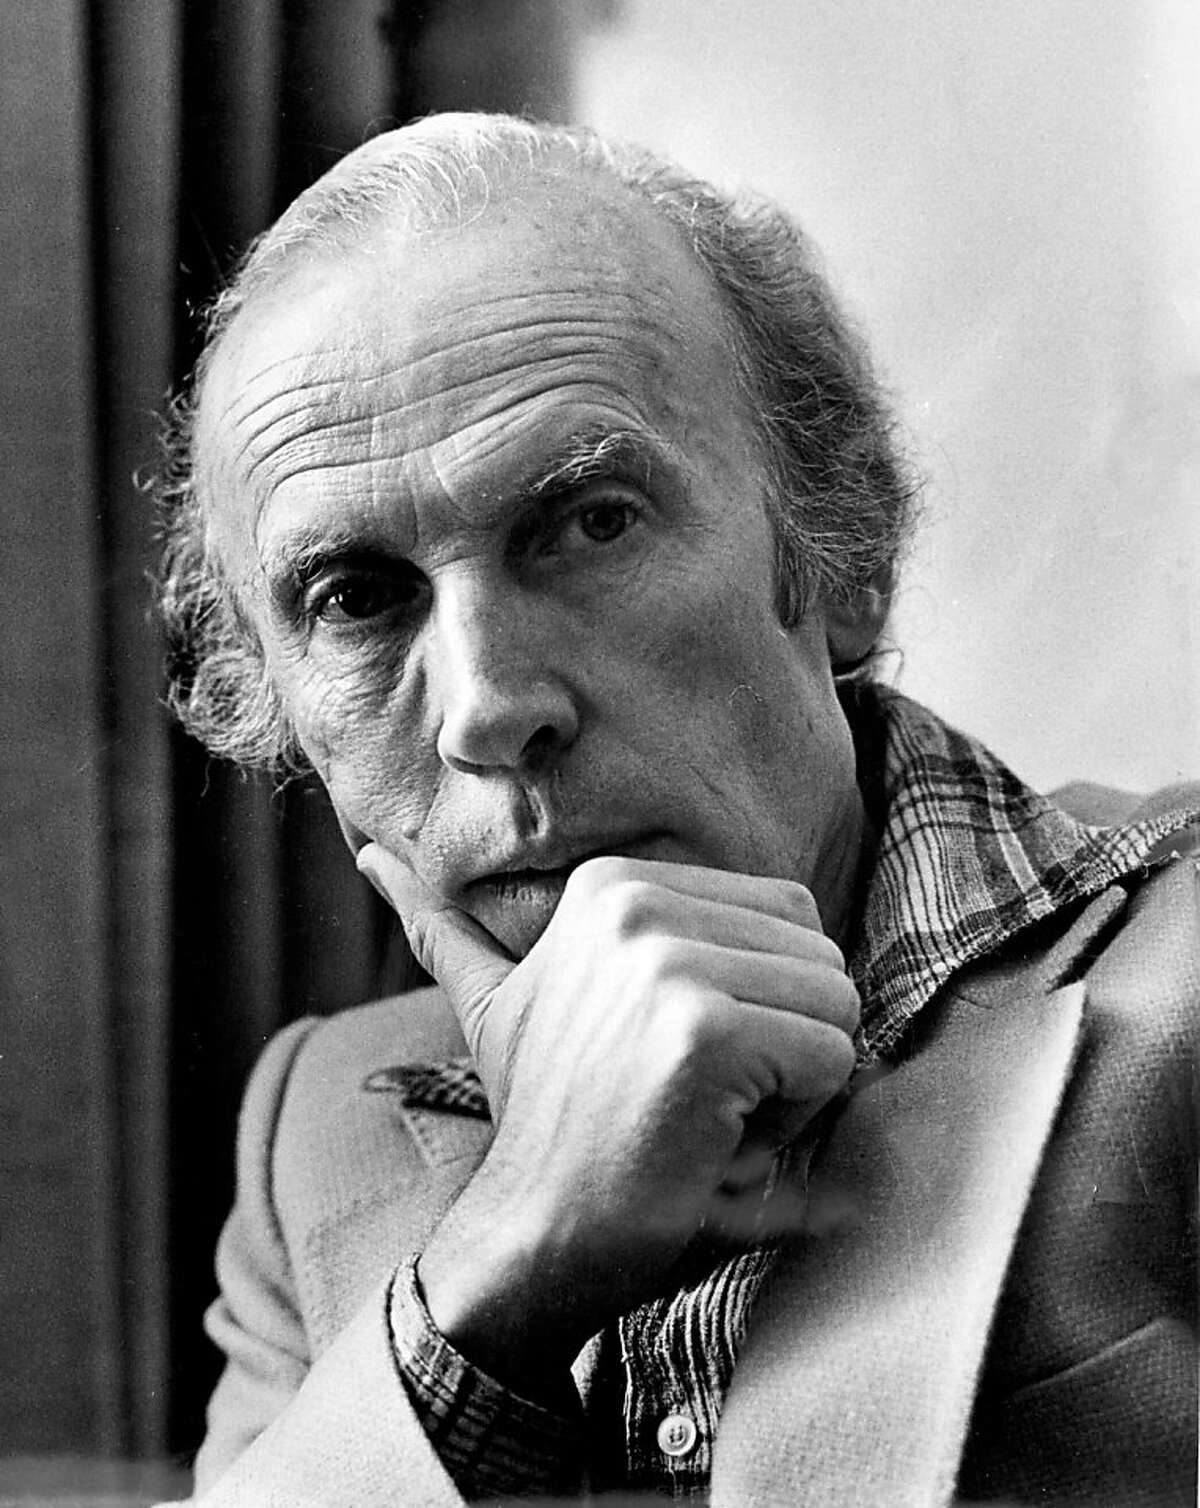 *FILE PHOTO* -- Filmmaker Eric Rohmer in 1976. Rohmer, the French critic and filmmaker who was one of the founding figures of the French New Wave and the director of more than 50 films, including the Oscar-nominated "My Night at Maud's," died on Monday, Jan. 11, 2010 in Paris. He was 89. His producer, Margaret Menegoz, confirmed his death, which took place at a Paris hospital, but provided no other details. (Tyrone Dukes/The New York Times)